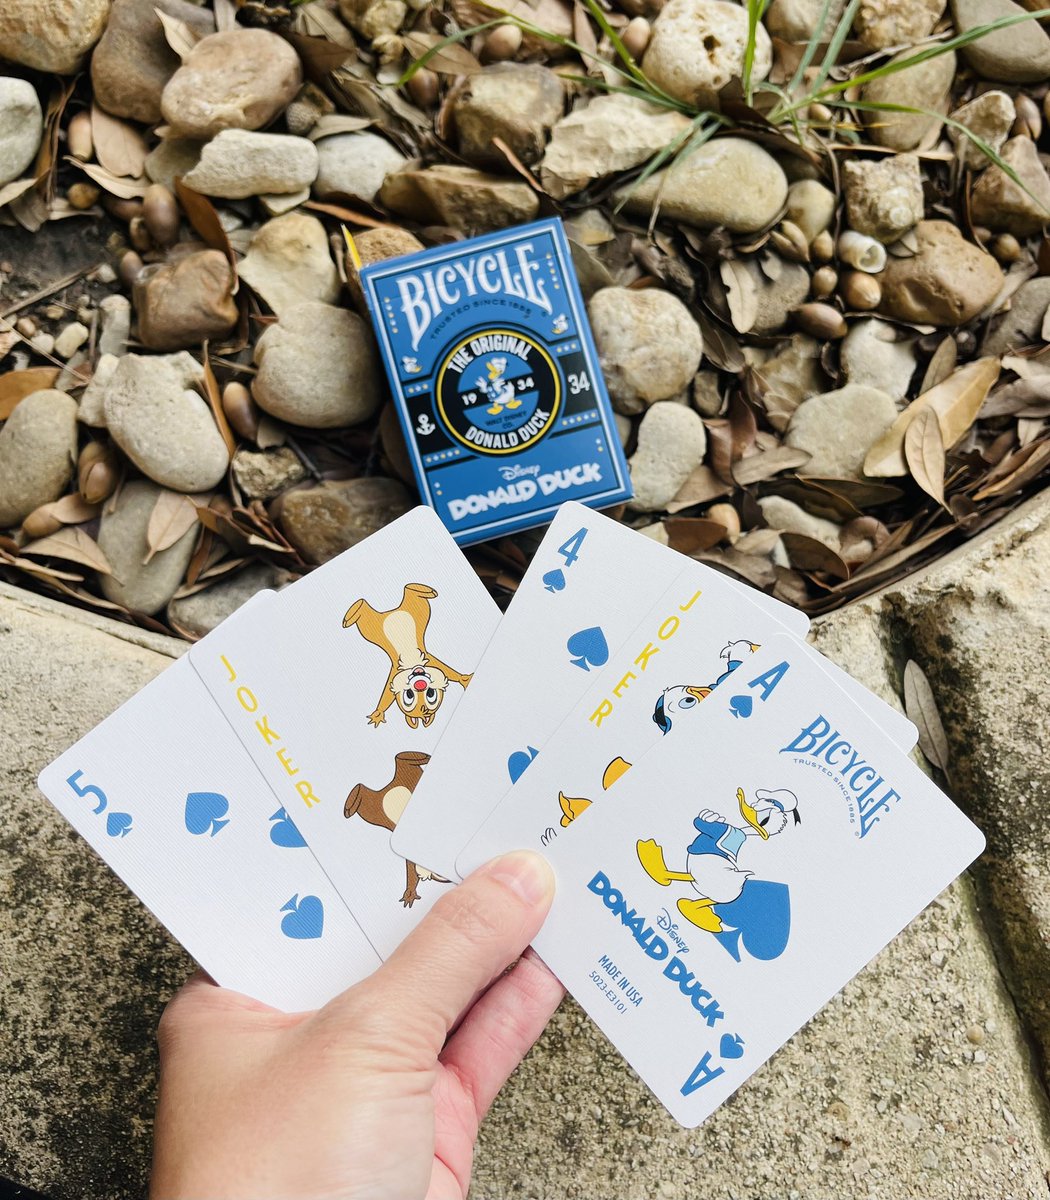 Check out these cool card decks from @bicyclecards. I’m impressed by the different styles. A perfect gift idea! 

#gifted #giftsforhim #giftsforher